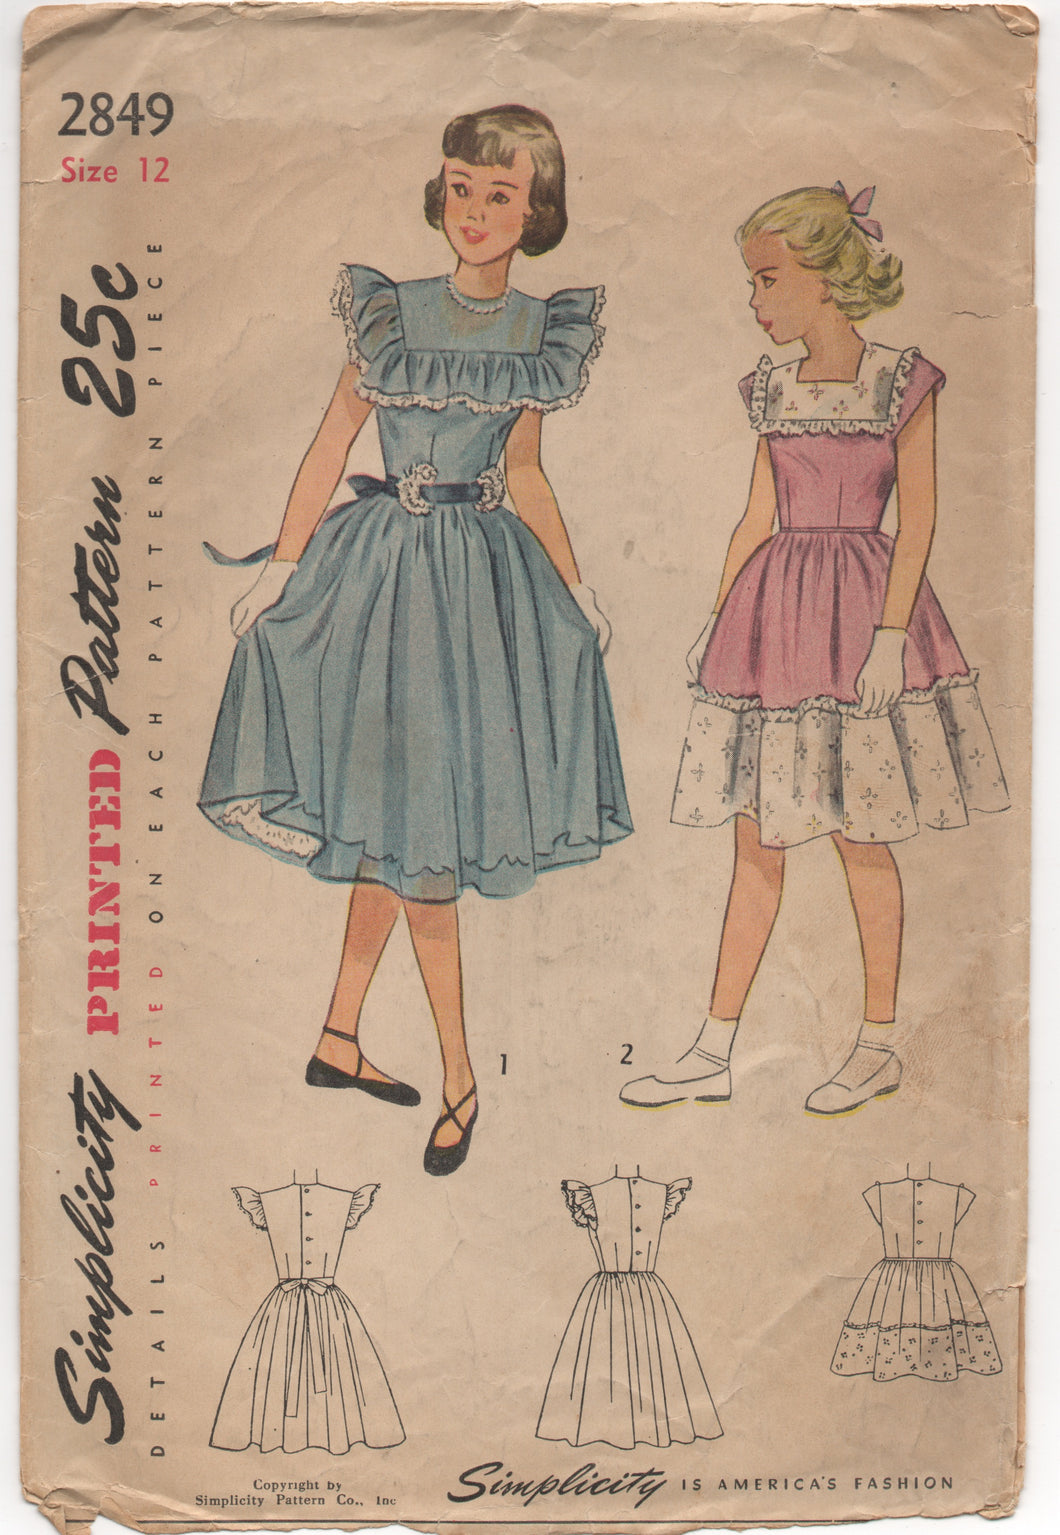 1940's Simplicity Girl's Pinafore Dress with Full Skirt - Chest 30